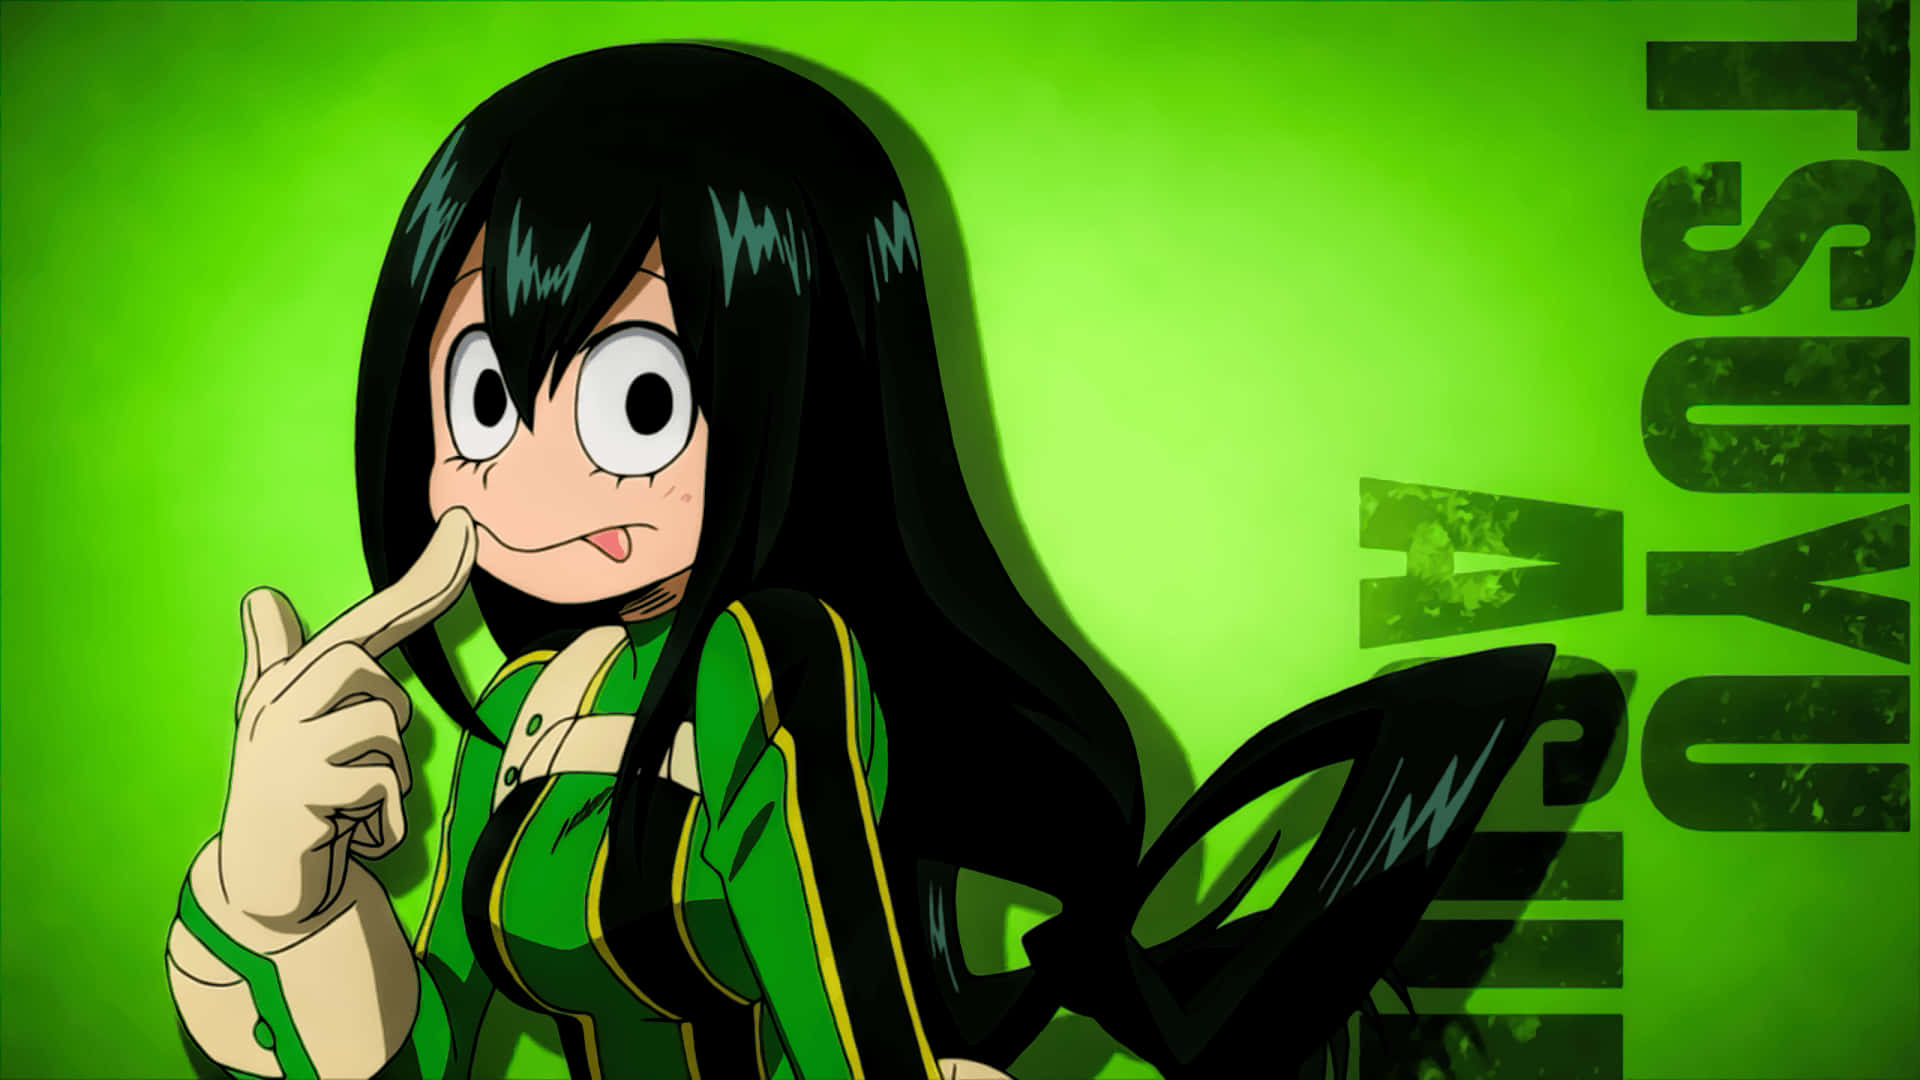 Get ready to be a hero with My Hero Academia!